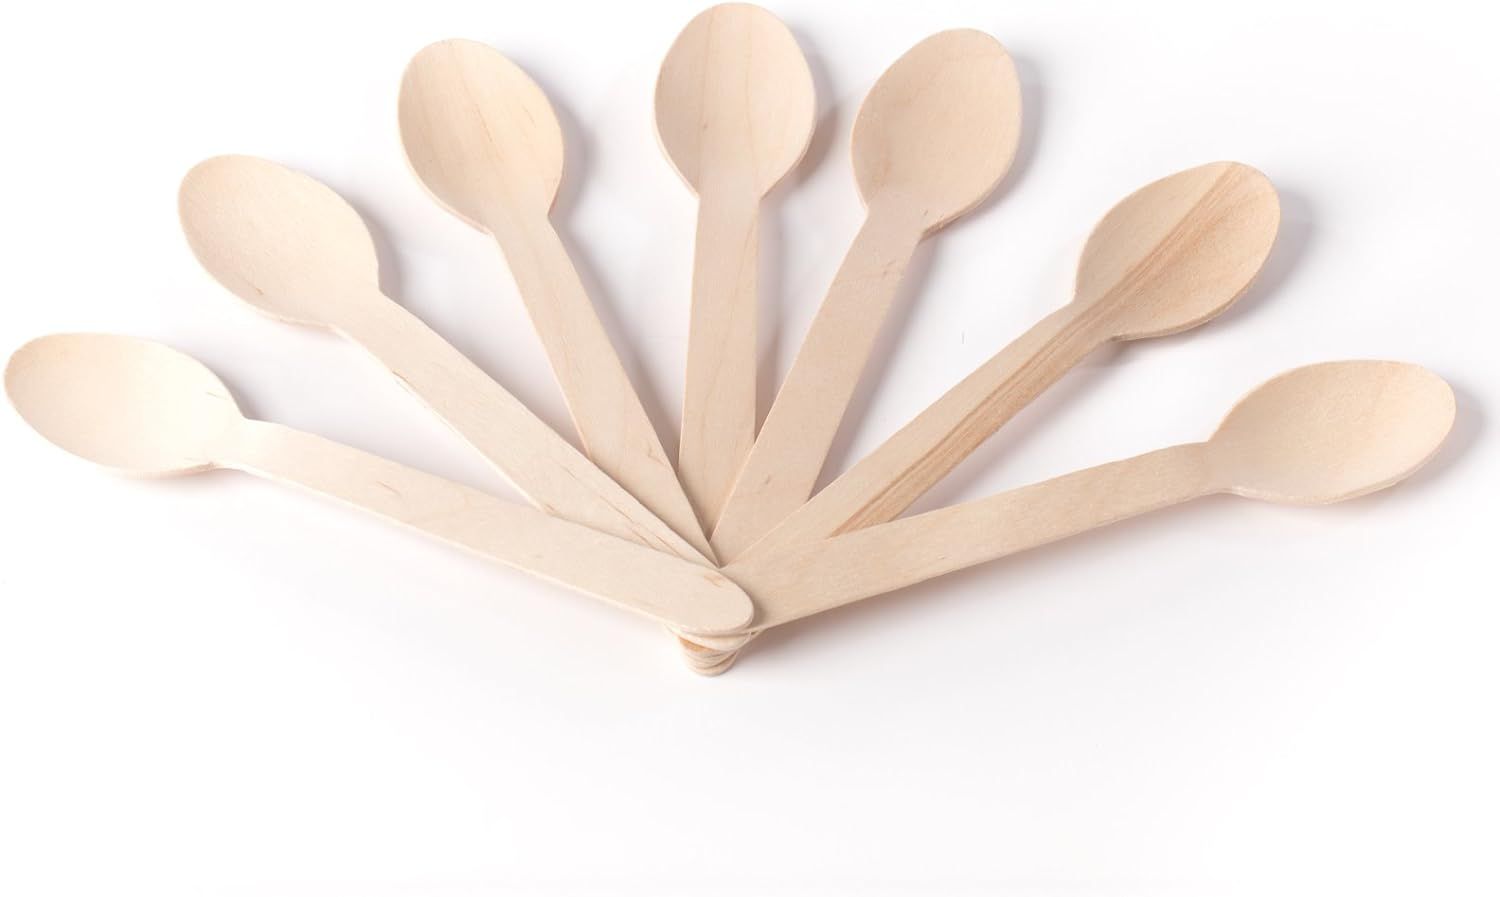 HUJI Eco- Friendly Wooden Spoons - Disposable Wood Cutlery! 50 Spoons 6.1" 2PK | Amazon (US)